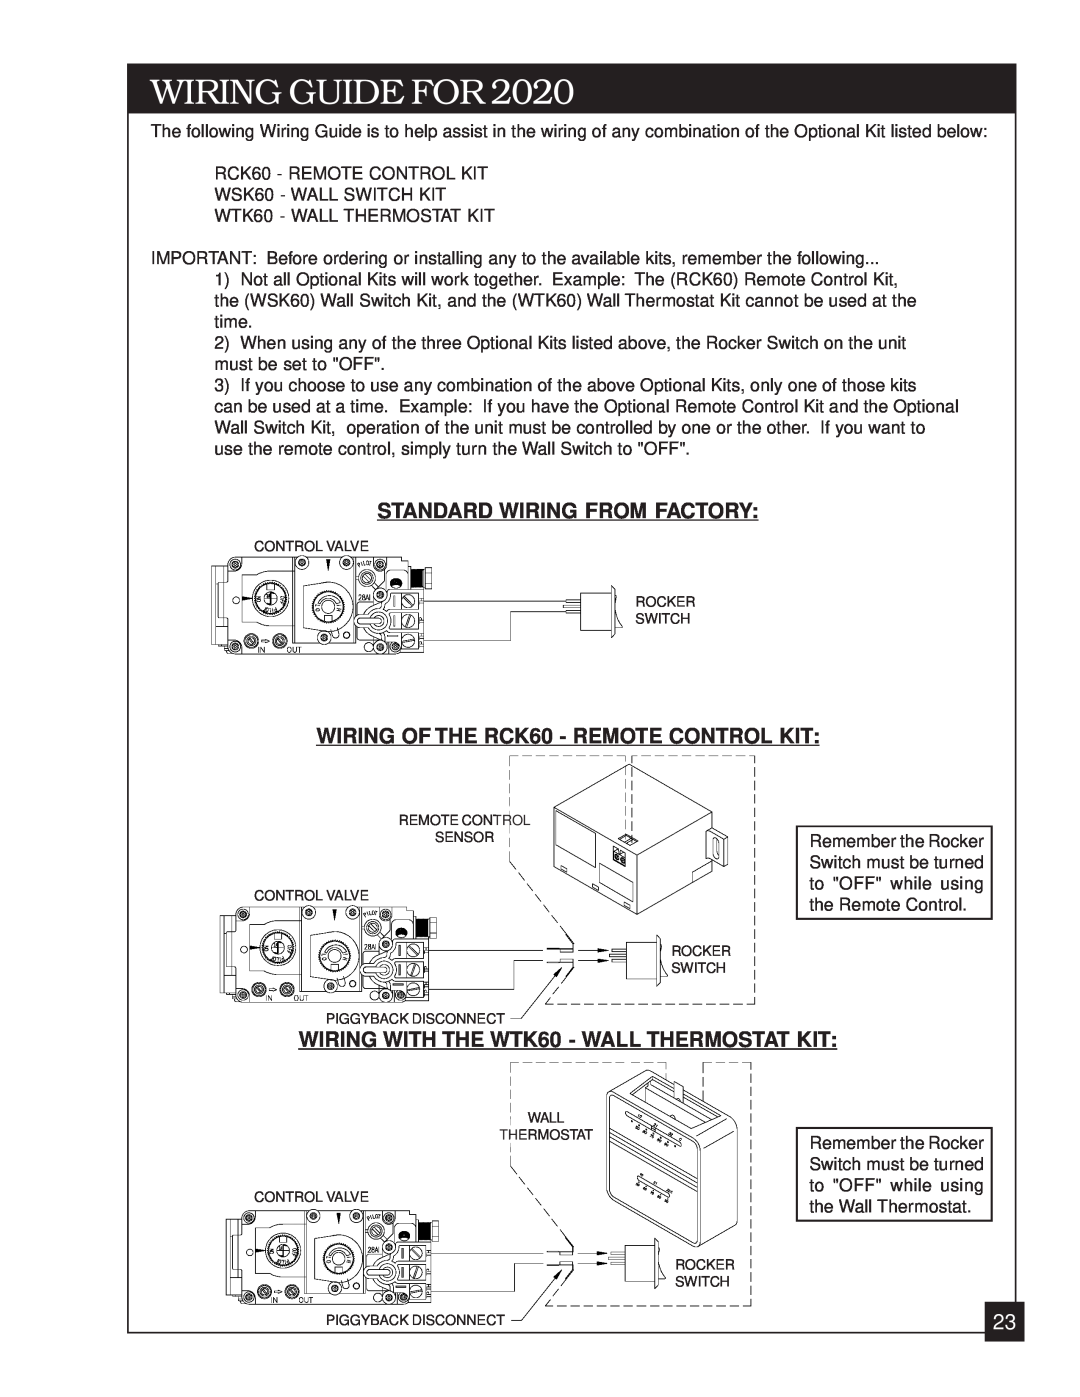 United States Stove 2020L Standard Wiring From Factory, WIRING OF THE RCK60 - REMOTE CONTROL KIT, Wiring Guide For 